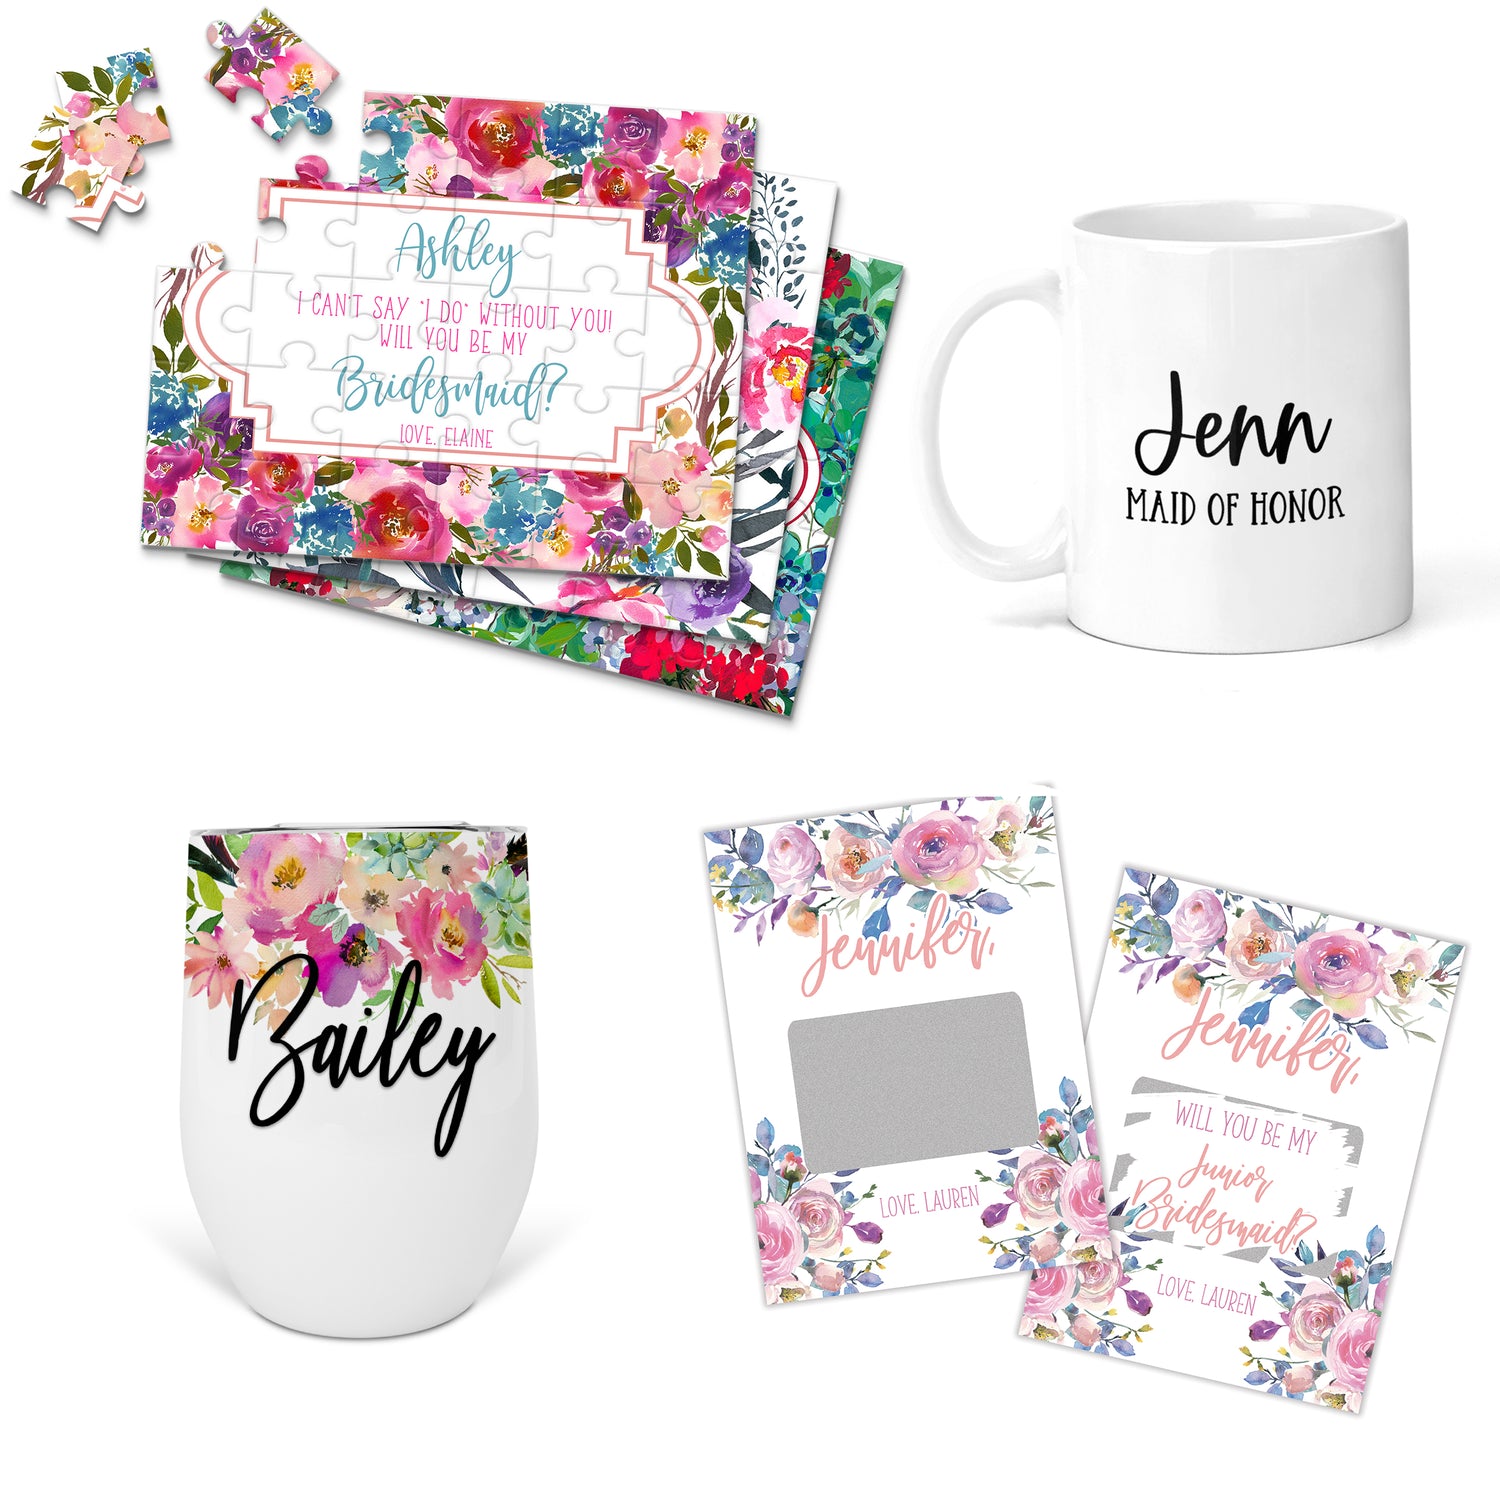 Wedding Announcements & Bridal Party Gifts